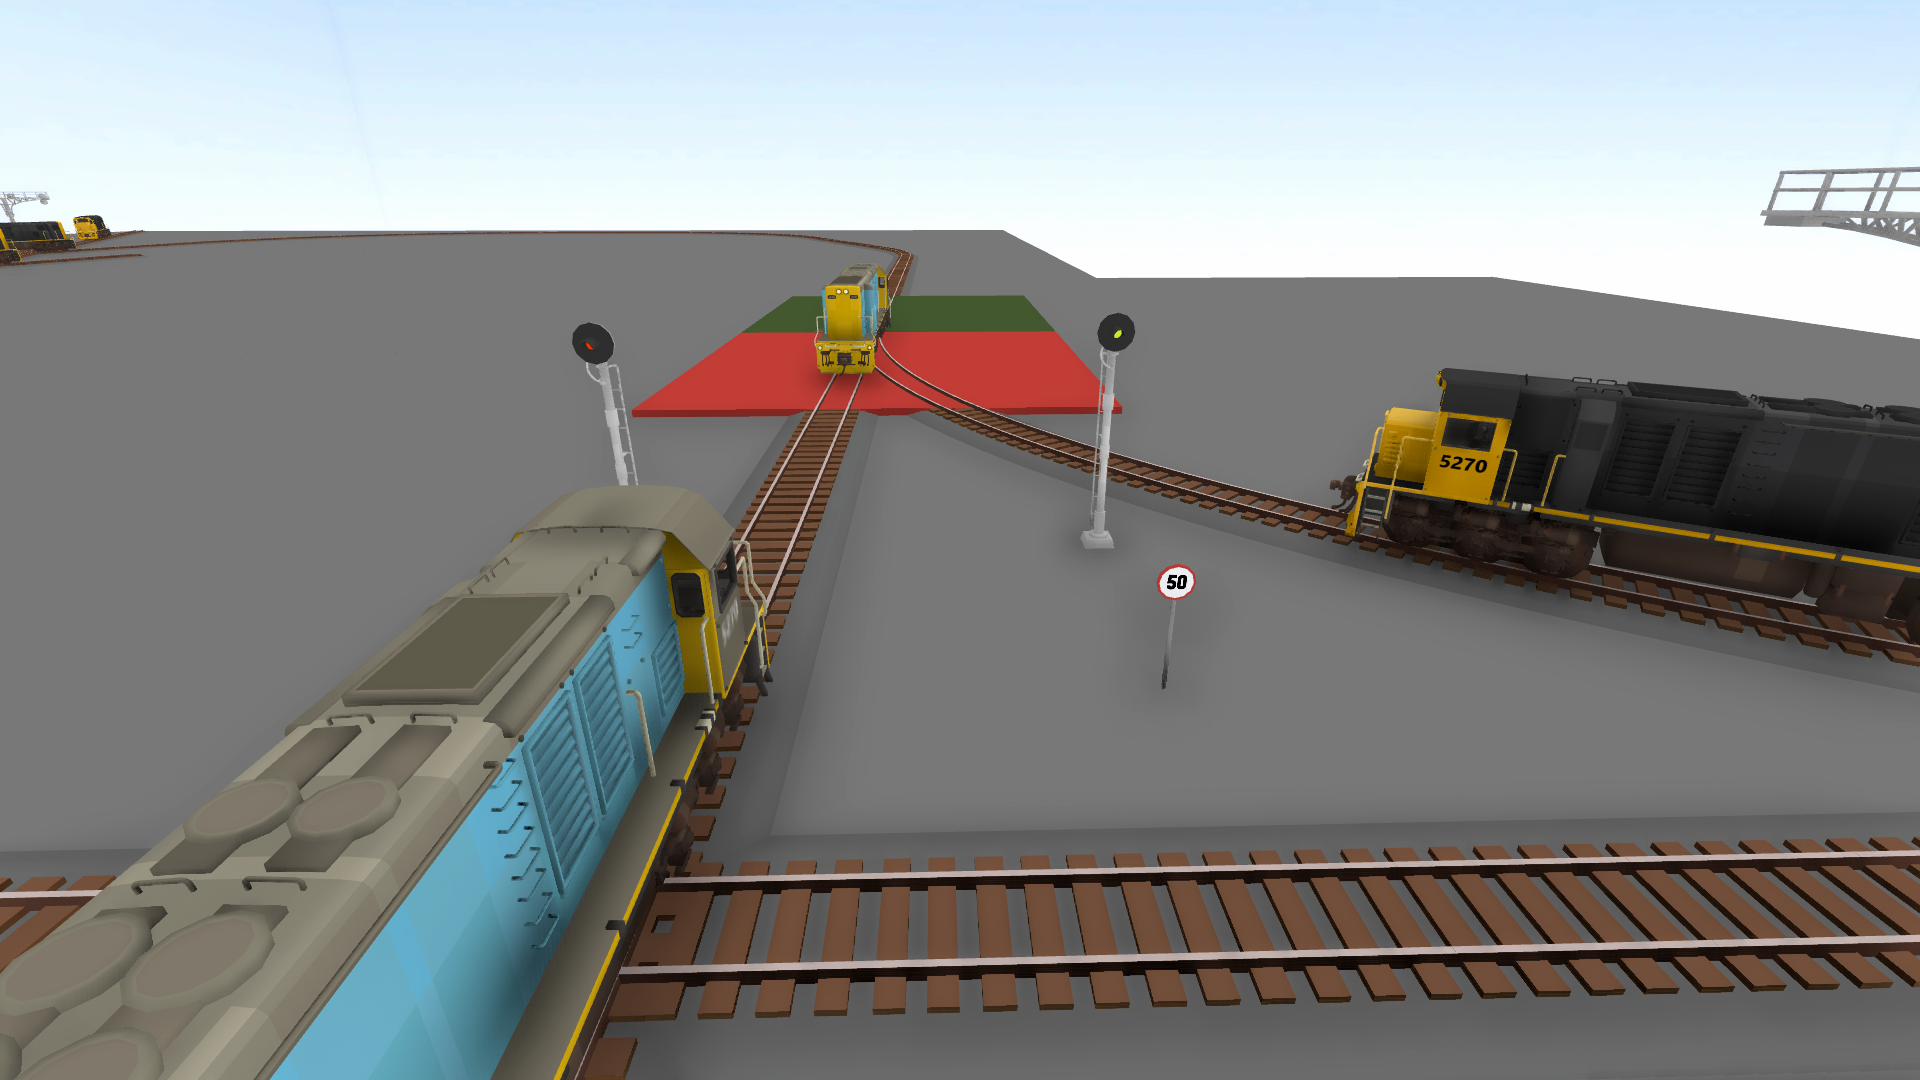 Rolling Line - Solution for Preventing AI Trains from Crashing Tips - Why did these trains crash? - 664B771